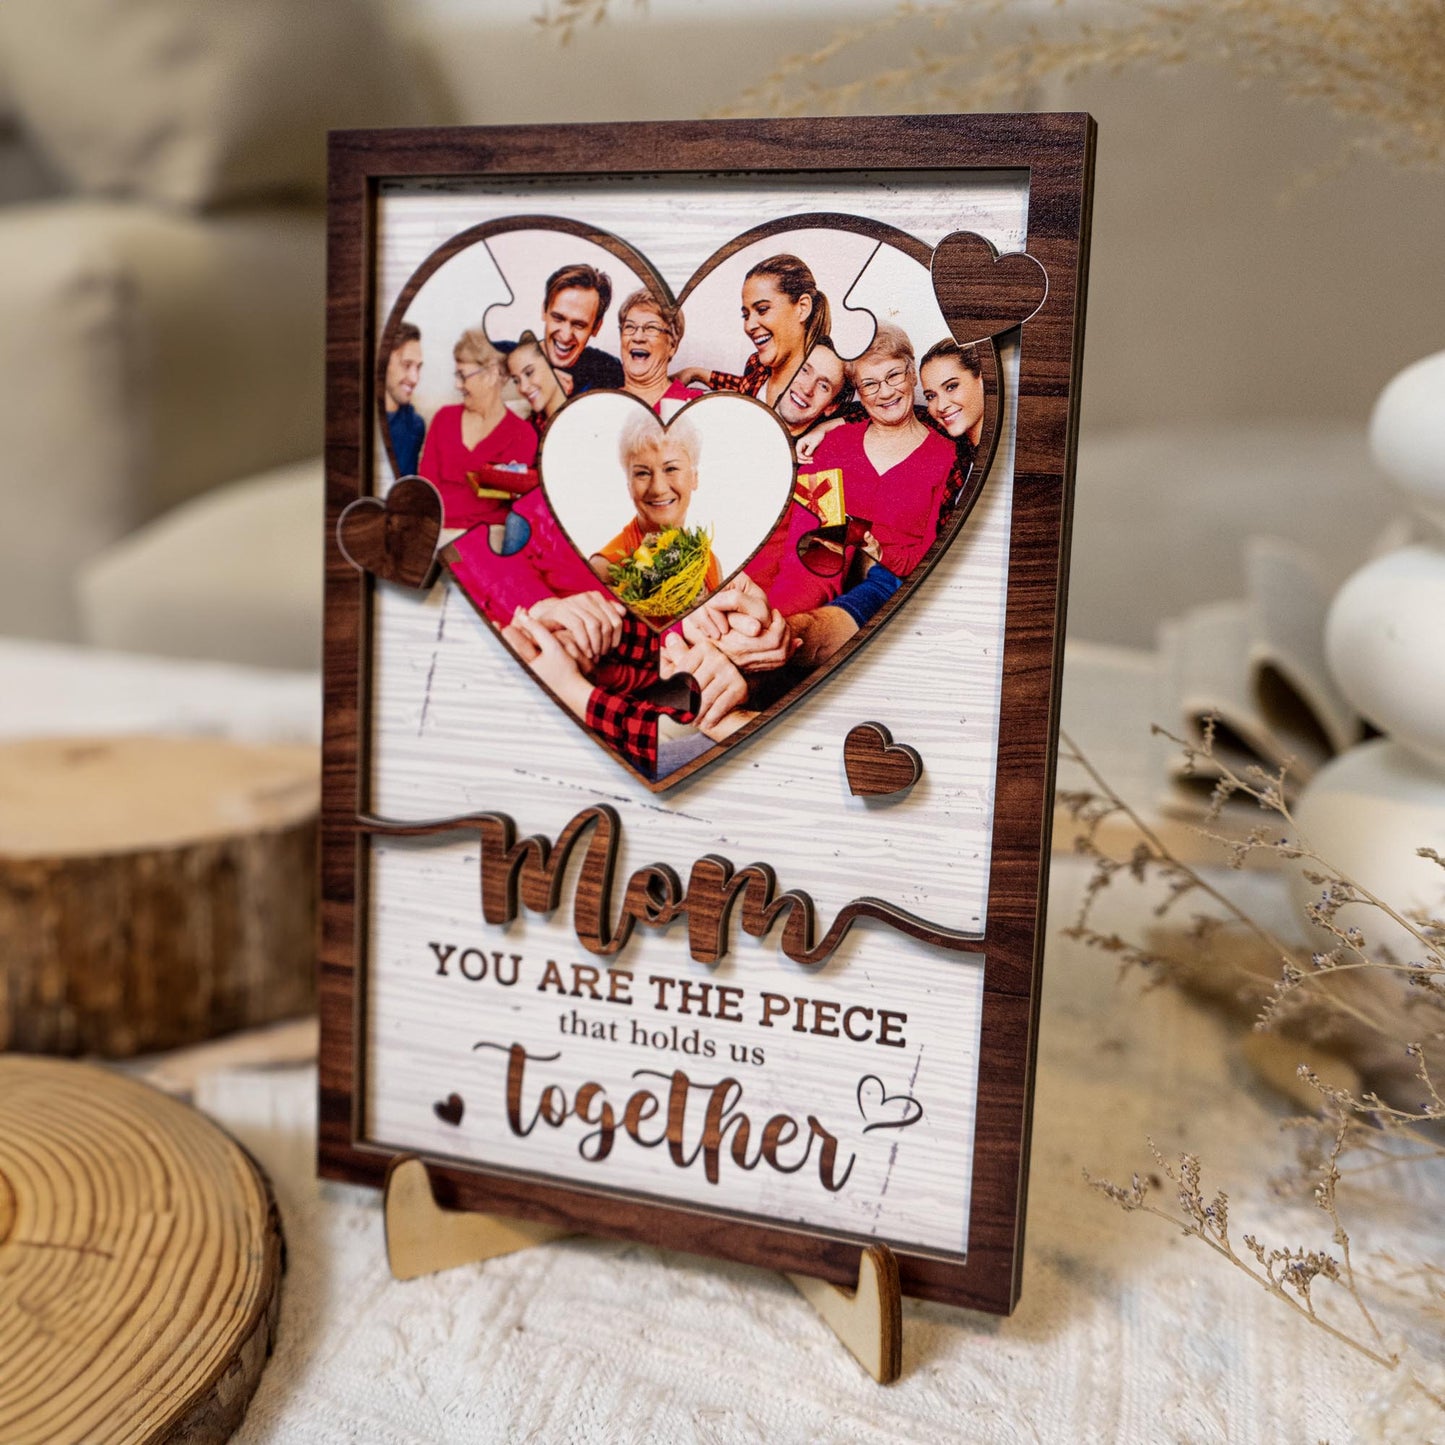 You Are The Piece That Hold Us Together - Personalized Wooden Photo Plaque